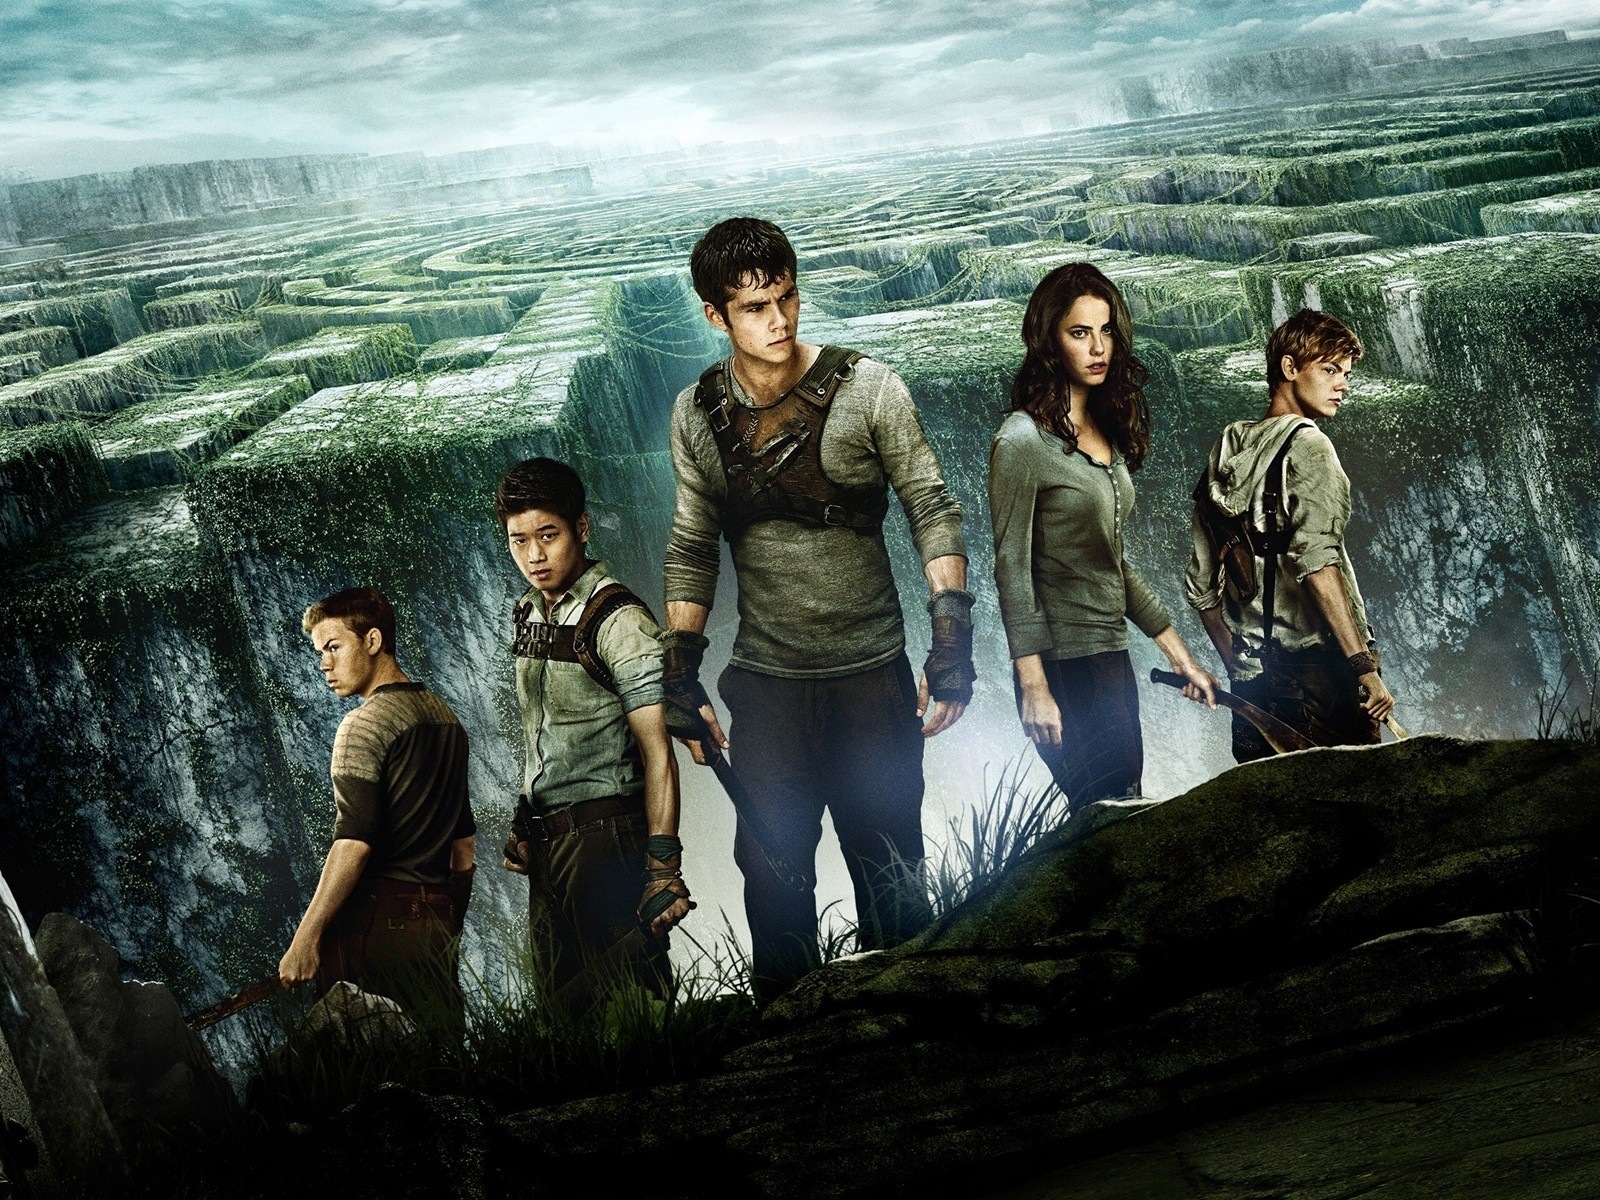 The Maze Runner HD movie wallpapers #1 - 1600x1200